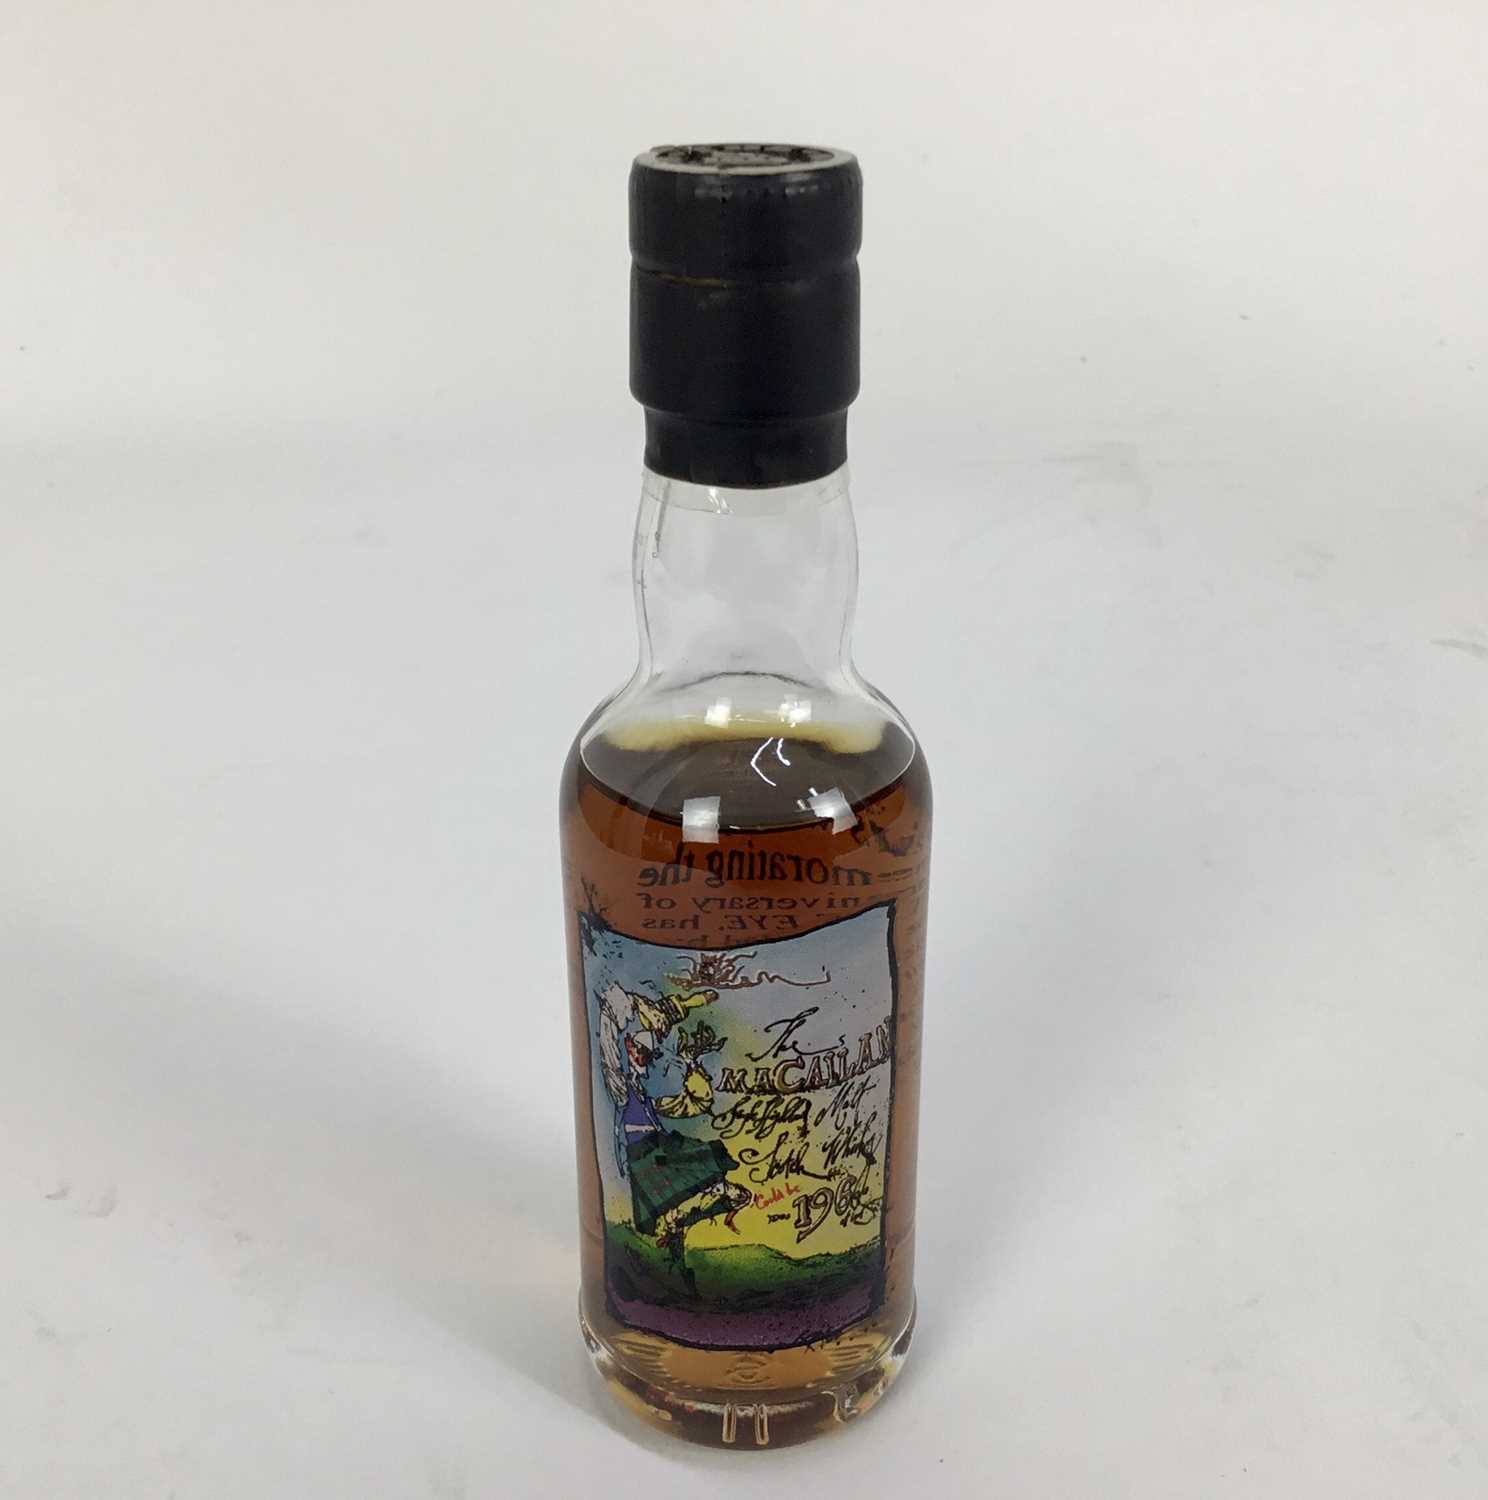 Lot 35 - Whisky - one miniature bottle, The Macallan Single Highland Malt Scotch Whiskey, 5cl., 40%. Commemorating the 35th anniversary of Private Eye, cask no. 1580, bonded 1961